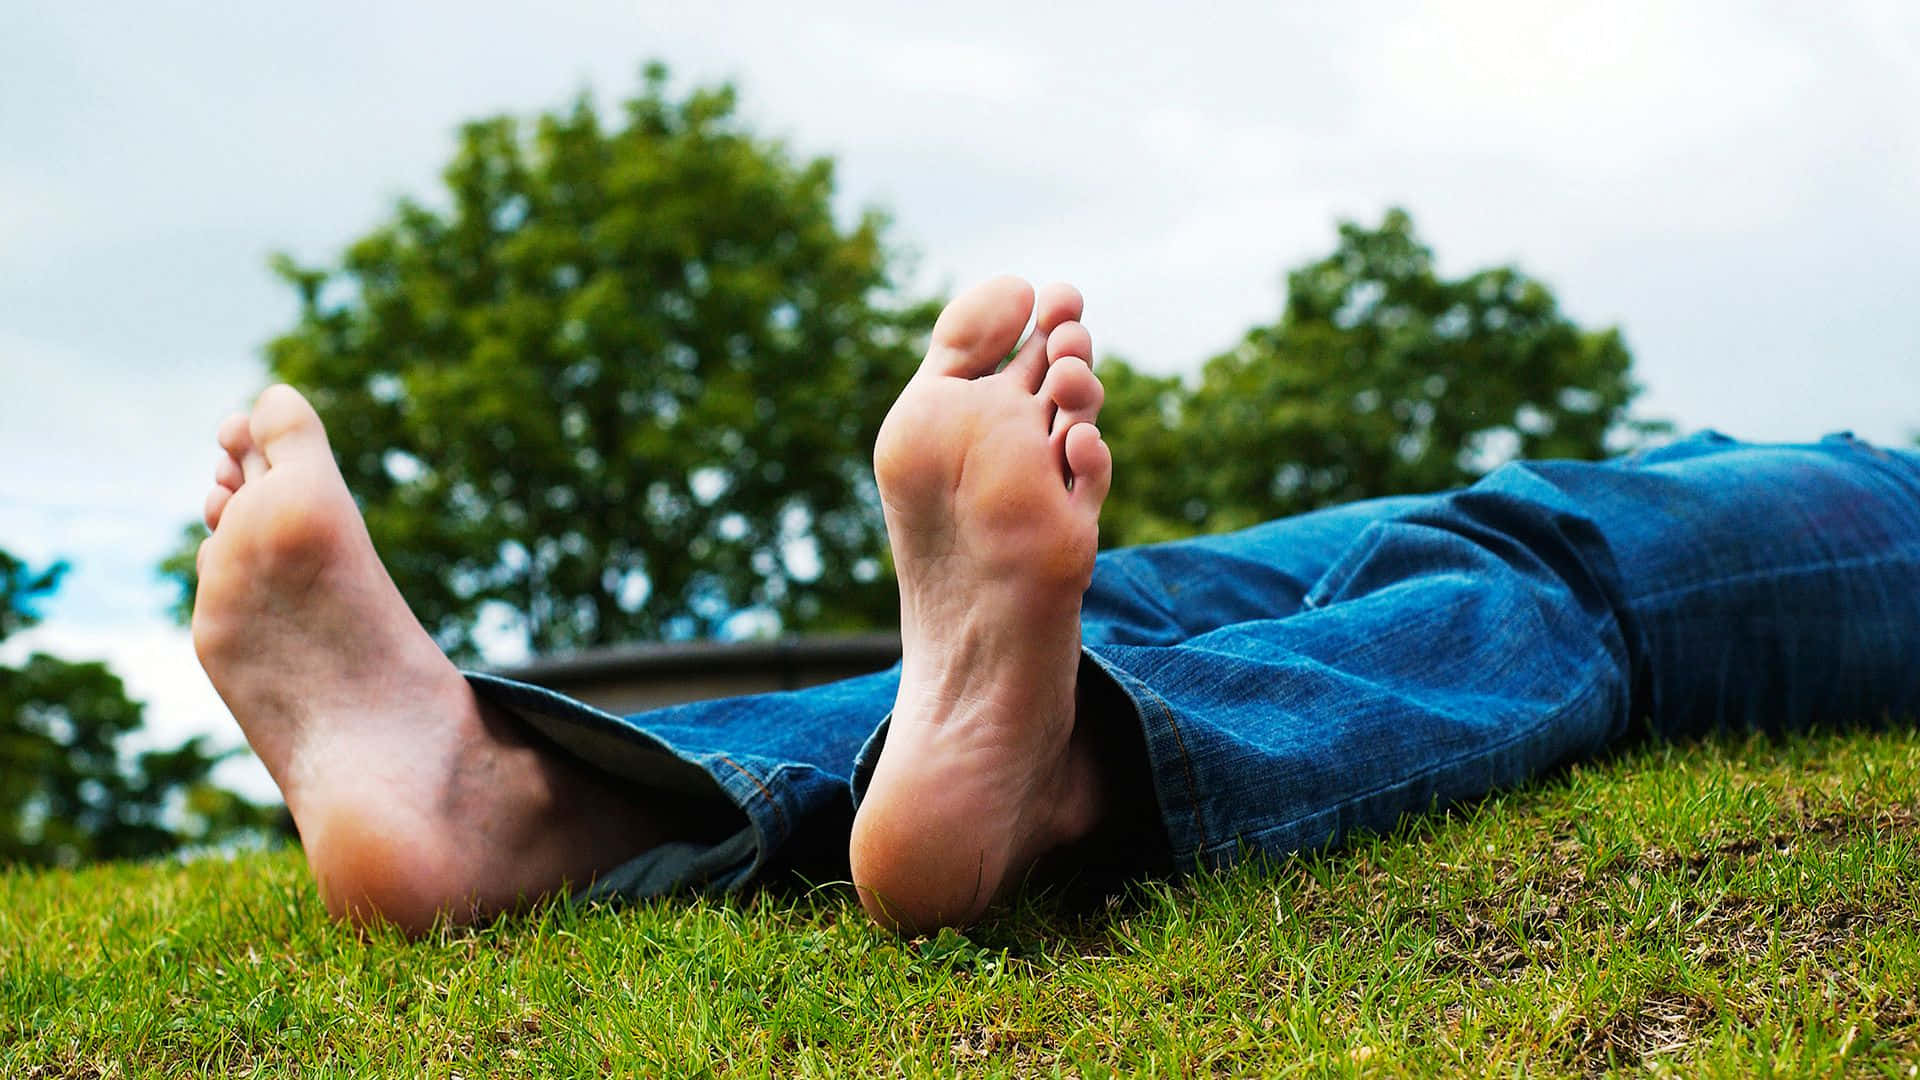 Male Lying On The Grass Showing Bare Feet Wallpaper